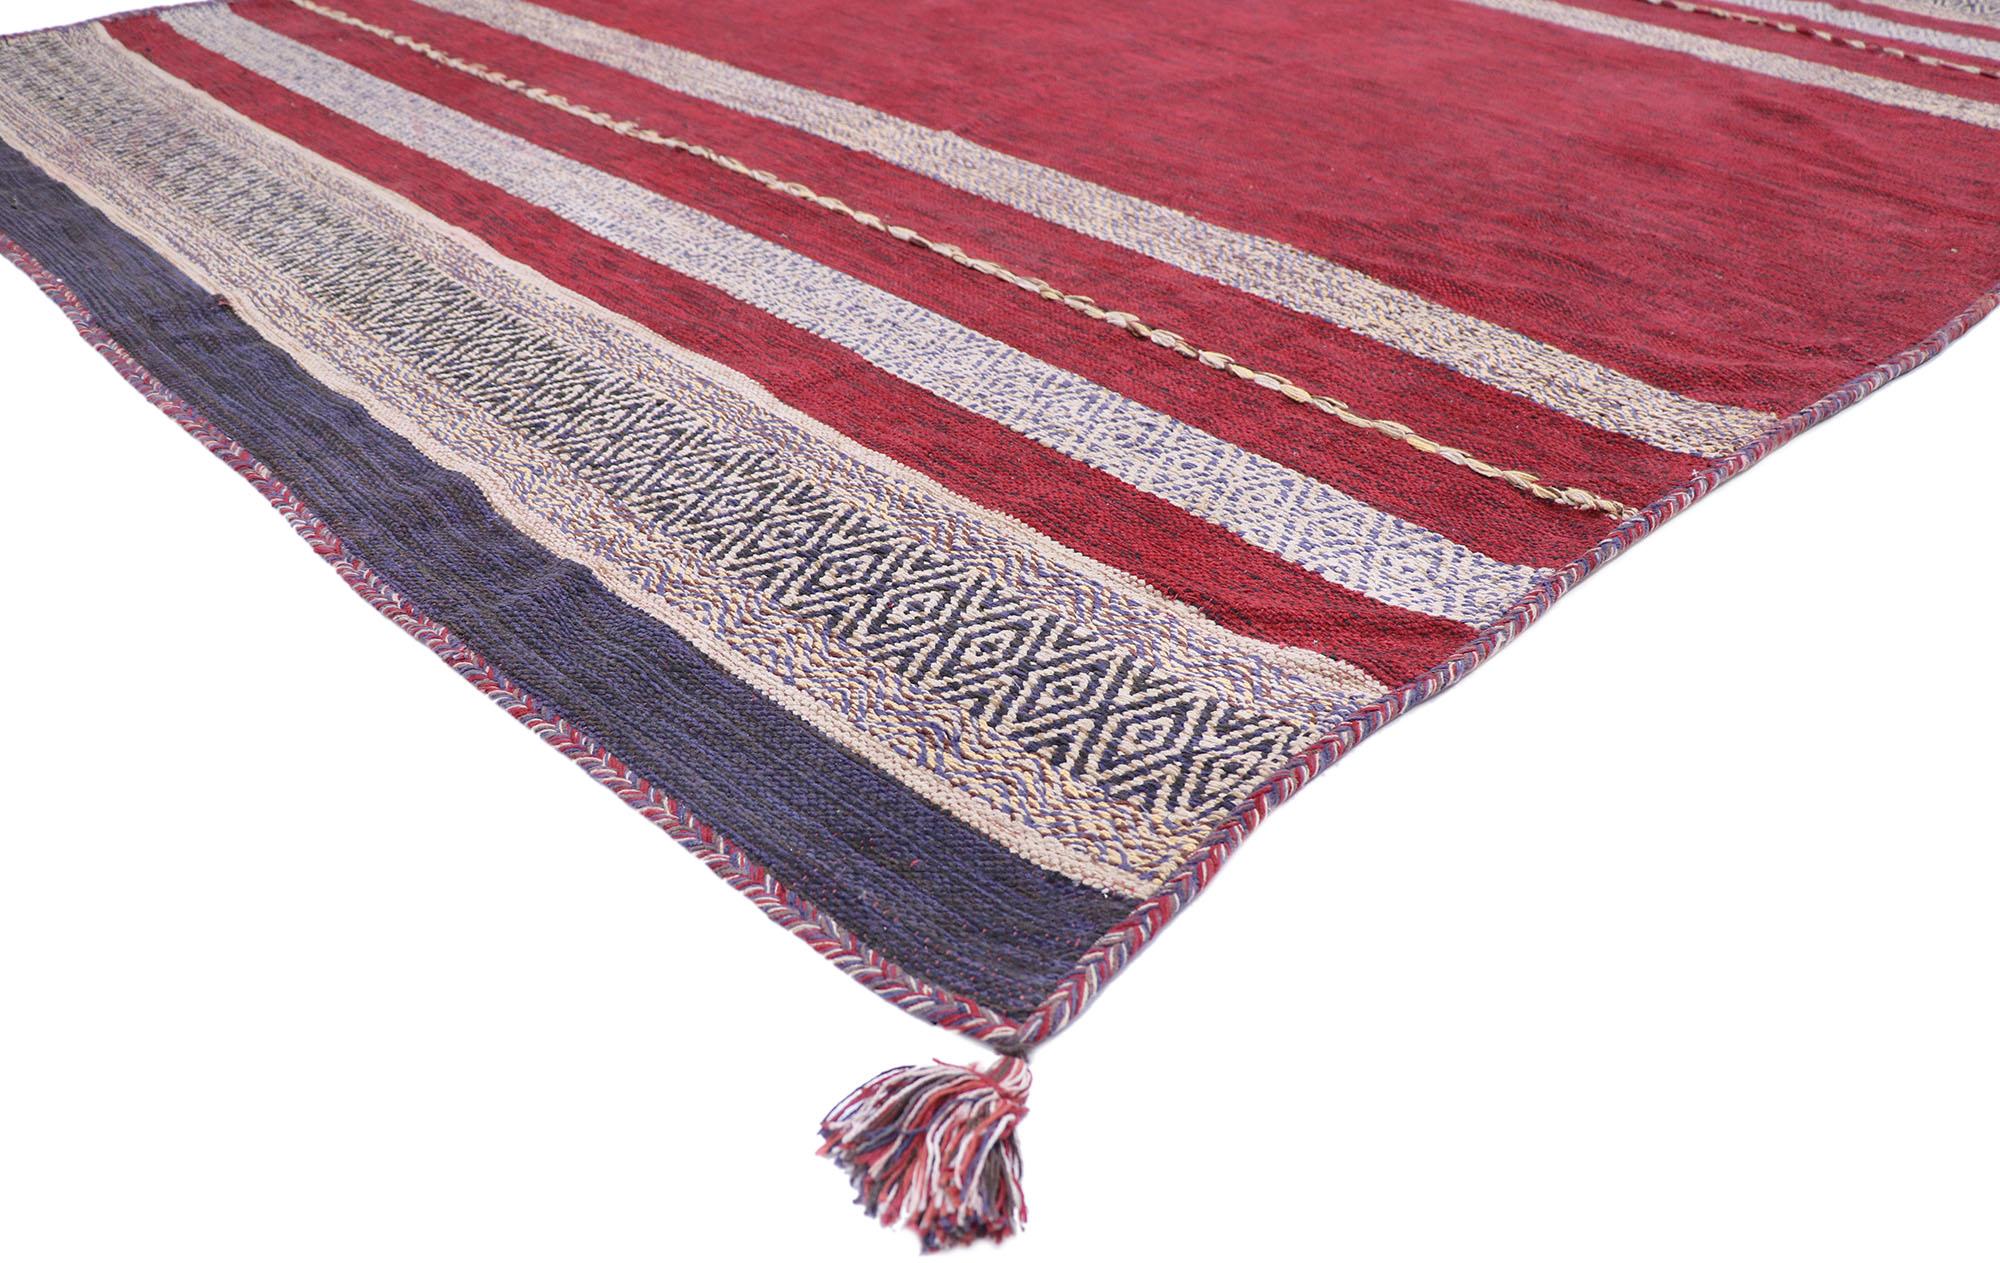 77786 Vintage Berber Moroccan Kilim Rug with Nautical Style 07'05 x 09'05. With its bold expressive design, incredible detail and texture, this hand-woven wool vintage Berber Moroccan Kilim rug is a captivating vision of woven beauty highlighting a